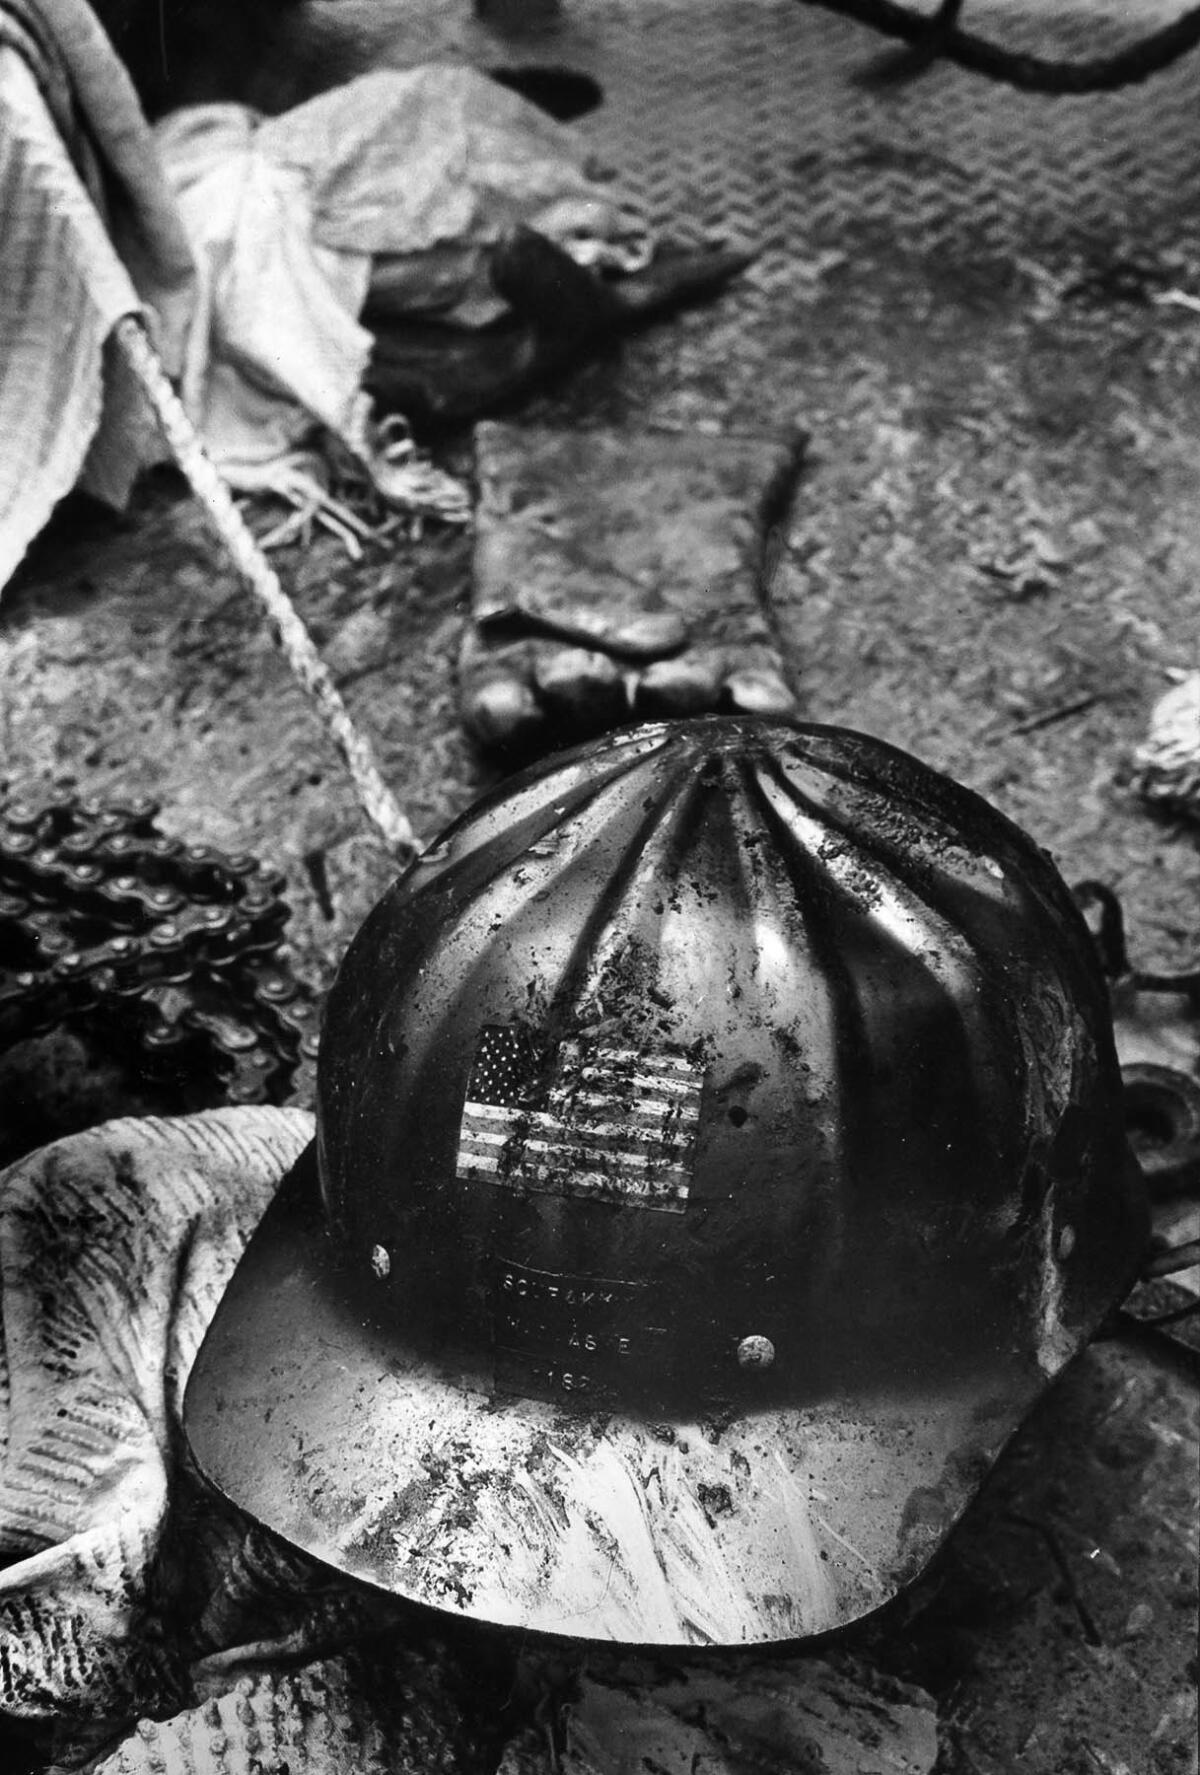 June 27, 1971: Helmet worn by William I. Ashe, 52, killed by explosion in tunnel in Sylmar.